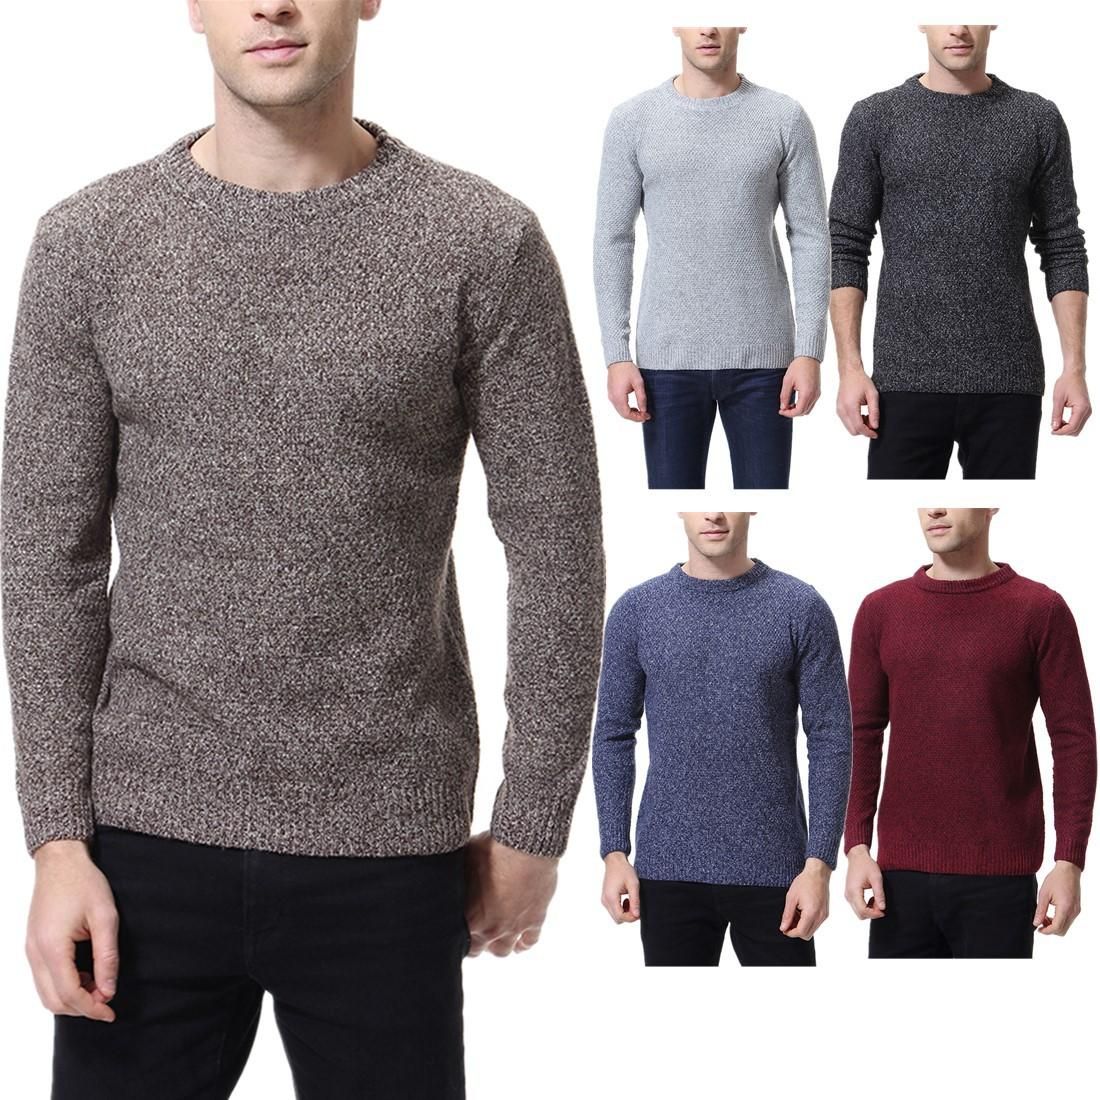 Hommes hiver Chaud Casual Col Ras Du Cou Tricot Pull Pullover Knitwear Jumper Sweater